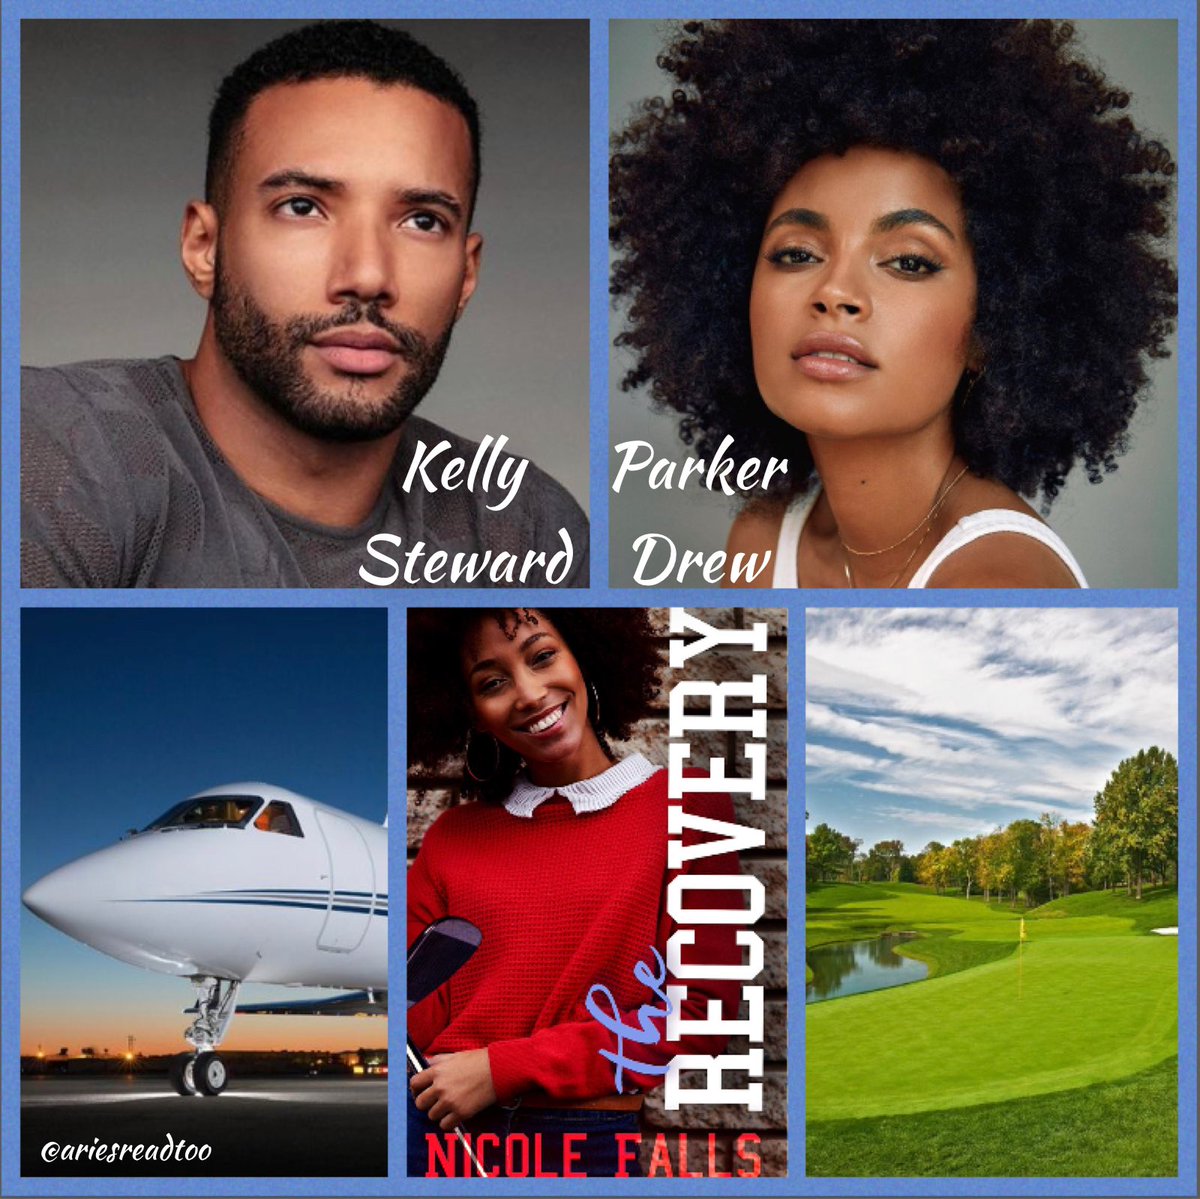 The Recovery (New Beginnings #3) by  @_nicolefalls about nanny/aspiring golf pro Parker Drew and pilot Kelly Steward. Parker is a full-time nanny to Chloe, Dylan and Ardelia Steward. I love the instant family trope and Nicole Falls is the Queen of the widower instant family trope!